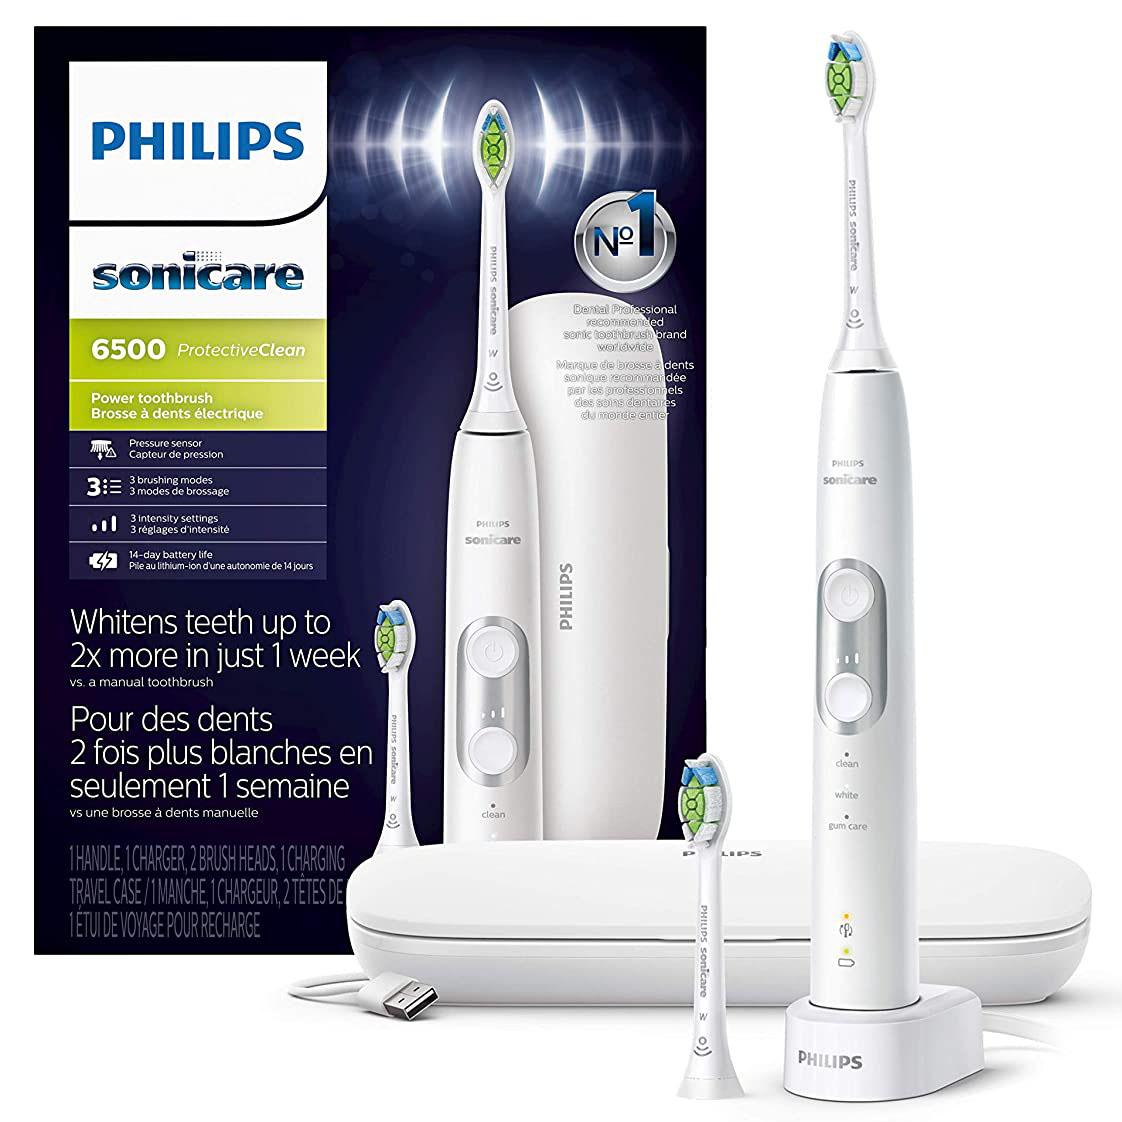 Philips Sonicare ProtectiveClean 6500 Electric Toothbrush for $104.97 Shipped